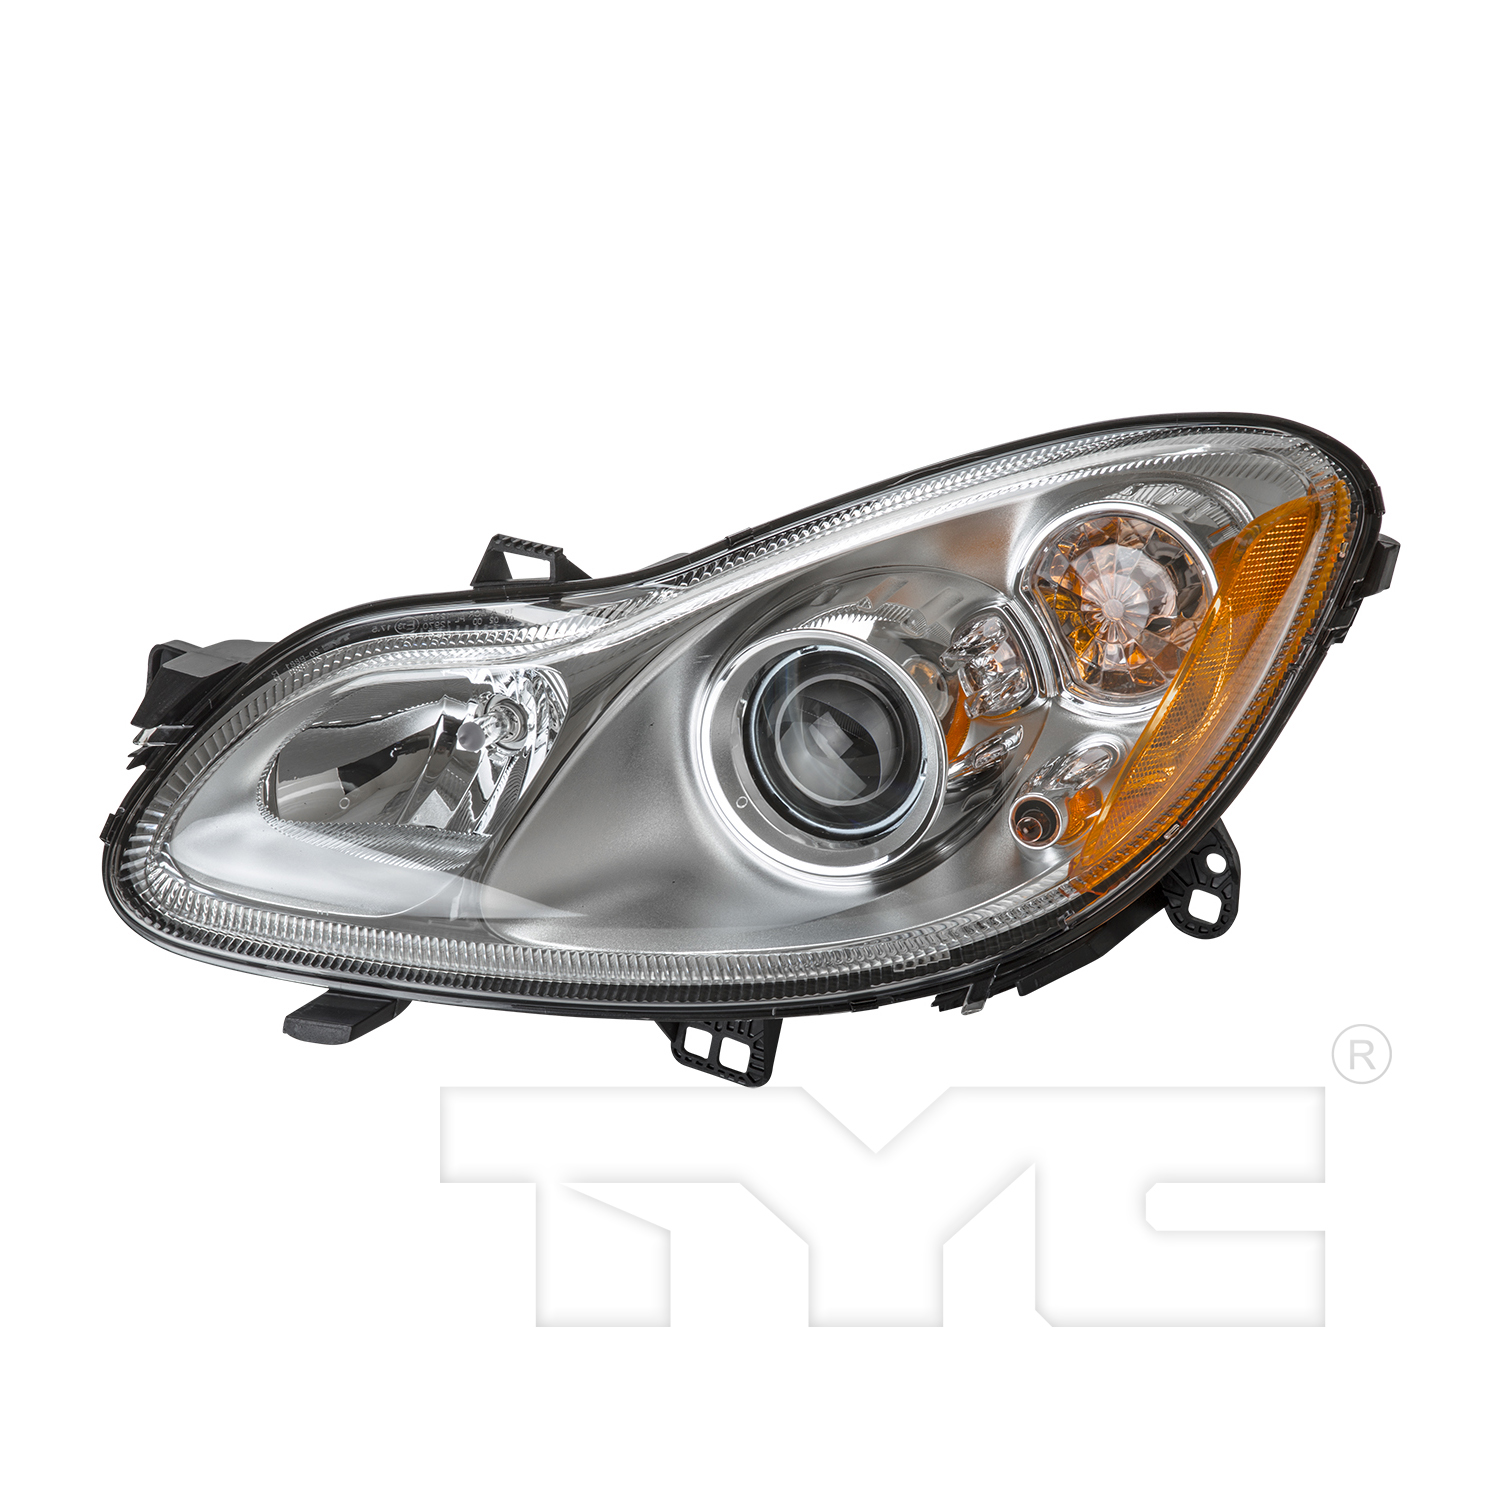 Aftermarket HEADLIGHTS for SMART - FORTWO, FORTWO,10-15,LT Headlamp assy composite